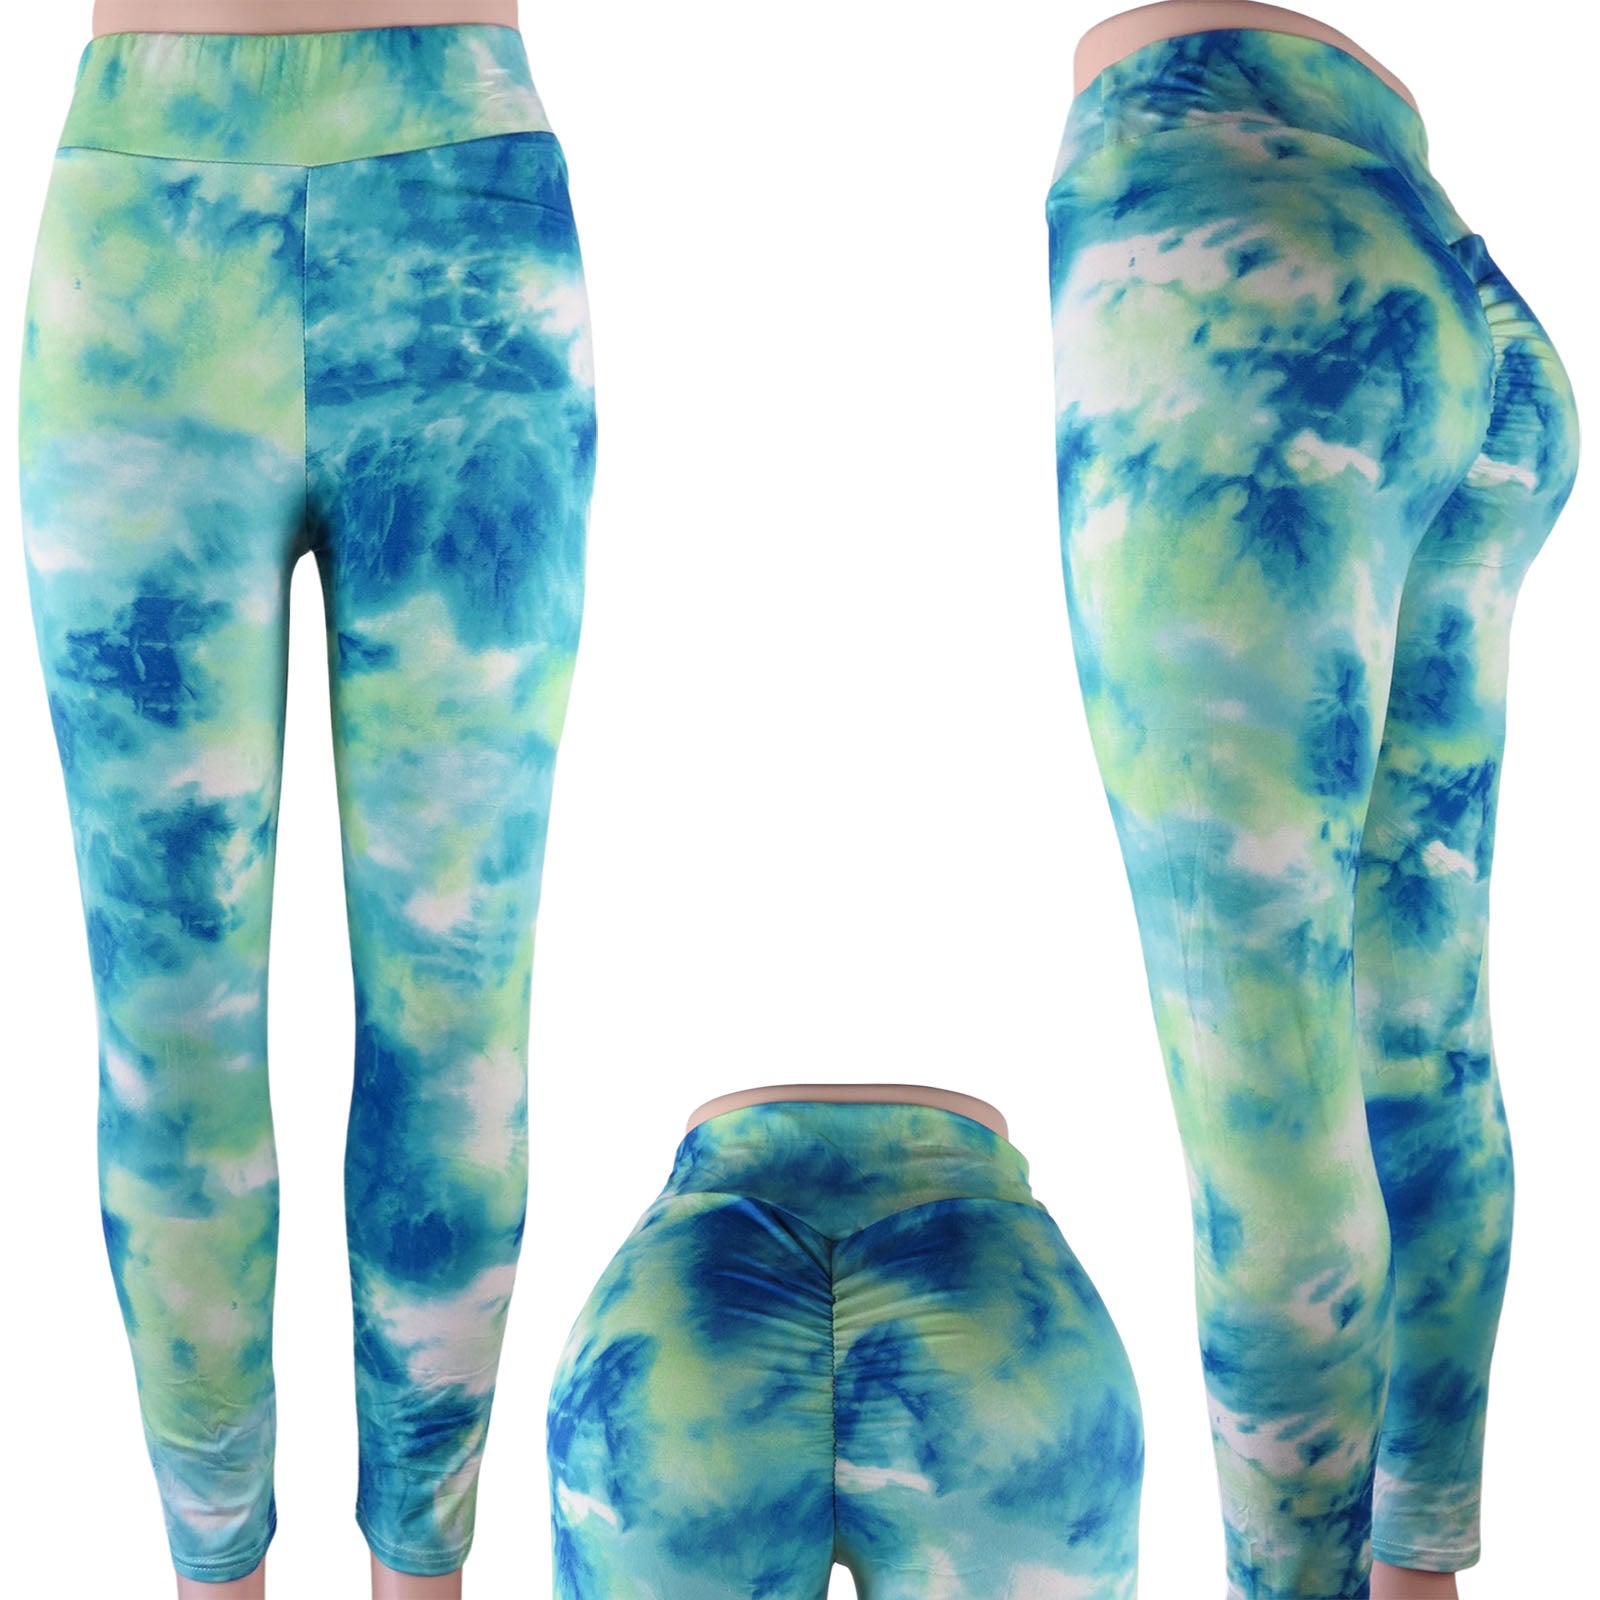 tie dye wholesale leggings with a scrunch butt and high waist in blue with green blend